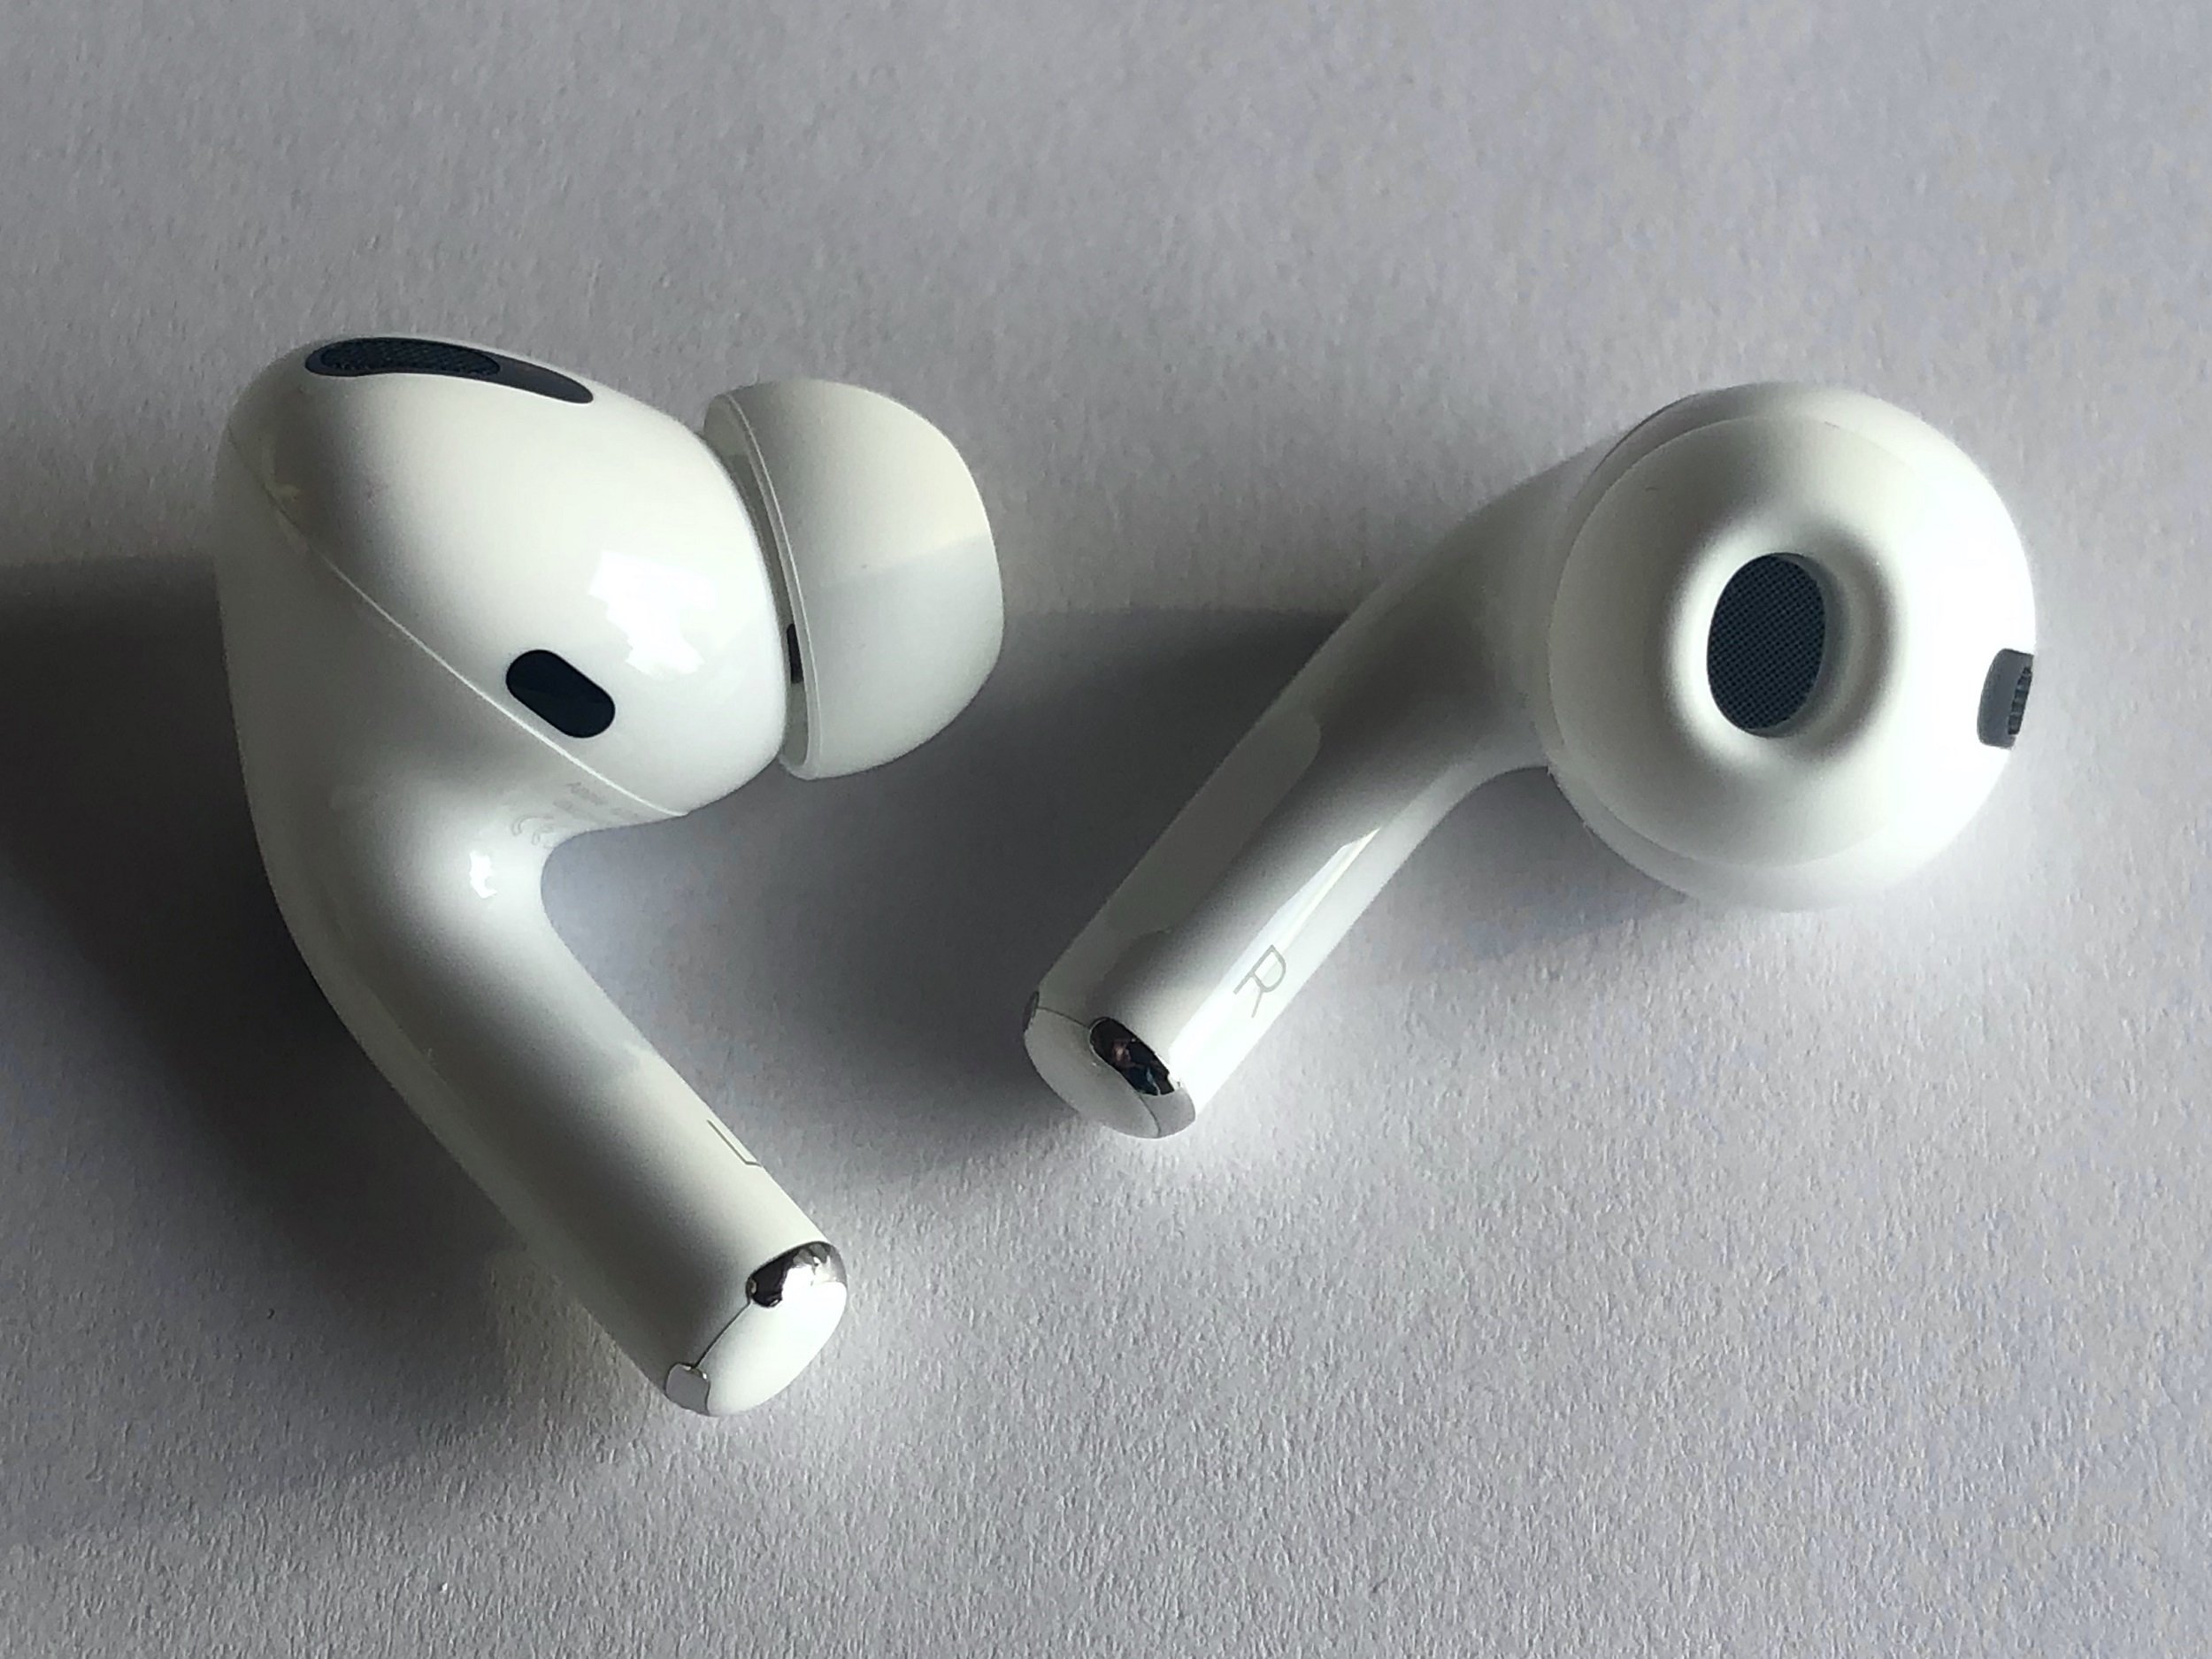 AirPods Pro Firmware Update: Download And